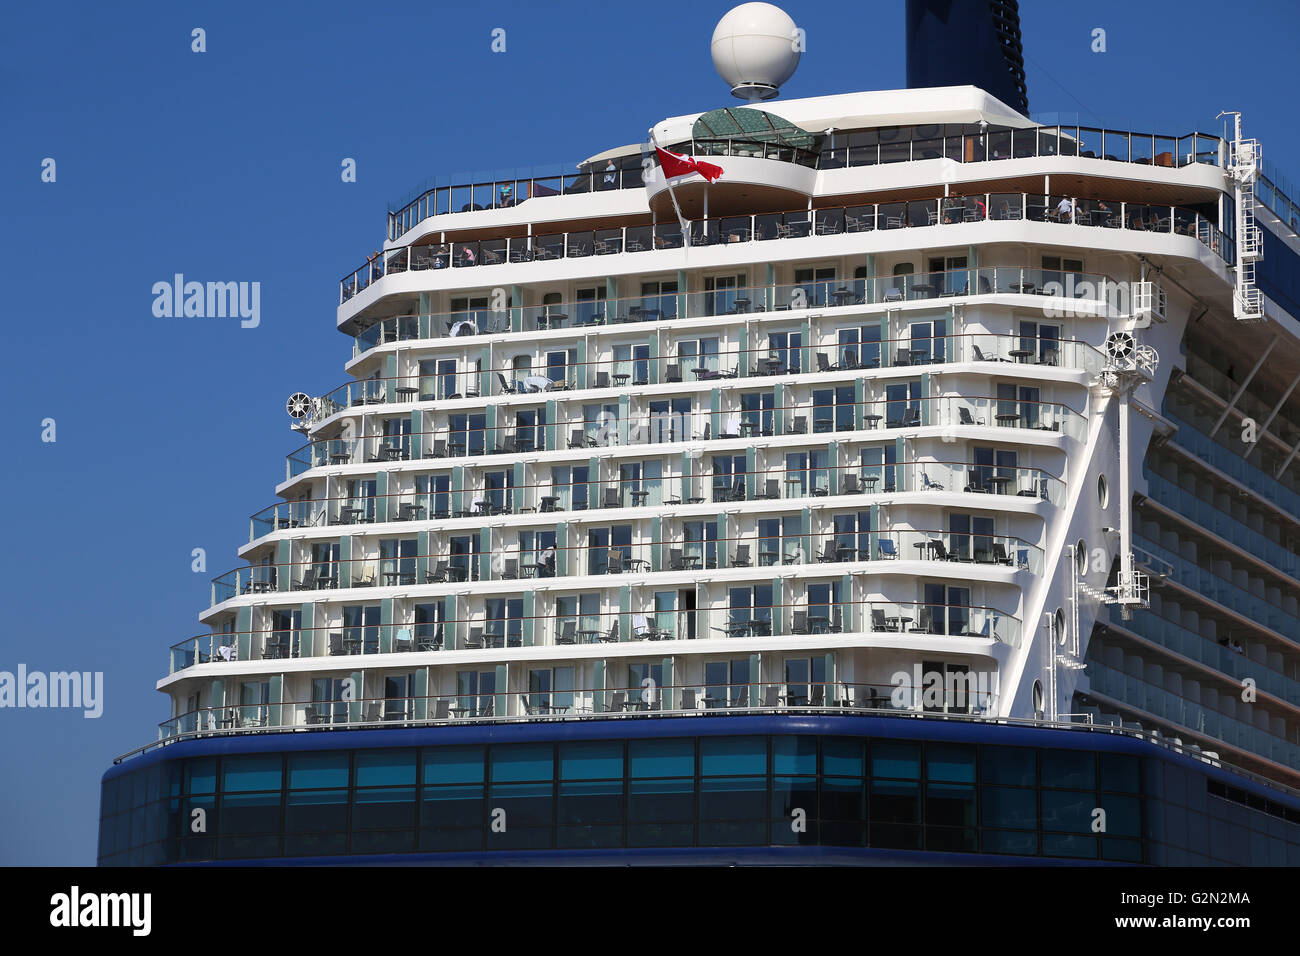 The Celebrity Reflection cruise ship moored in the Mykonos Harbor Stock Photo